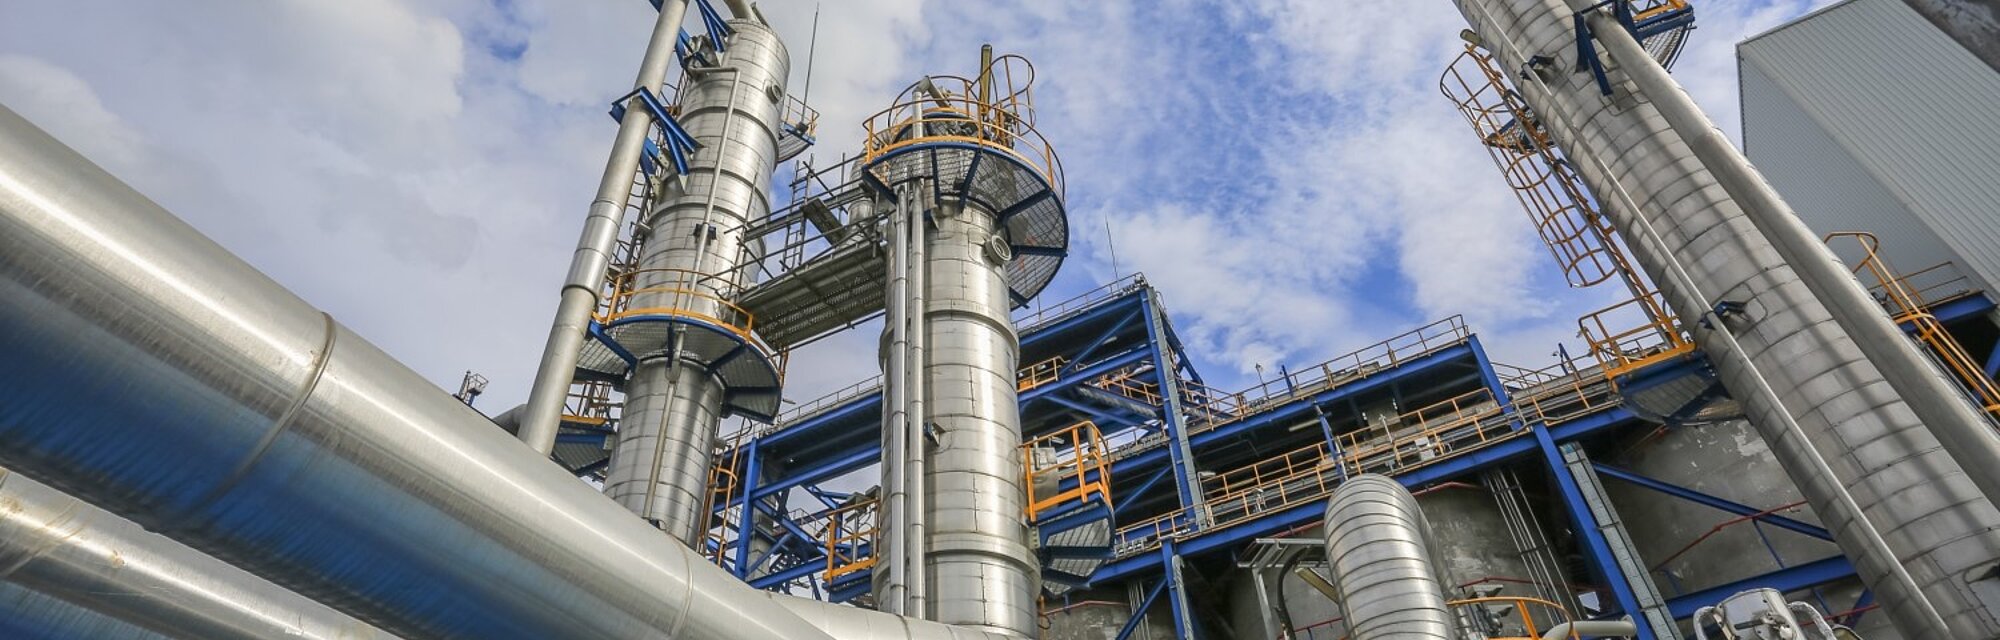 Protection of Chemical and Pharmaceutical Processing Facilities